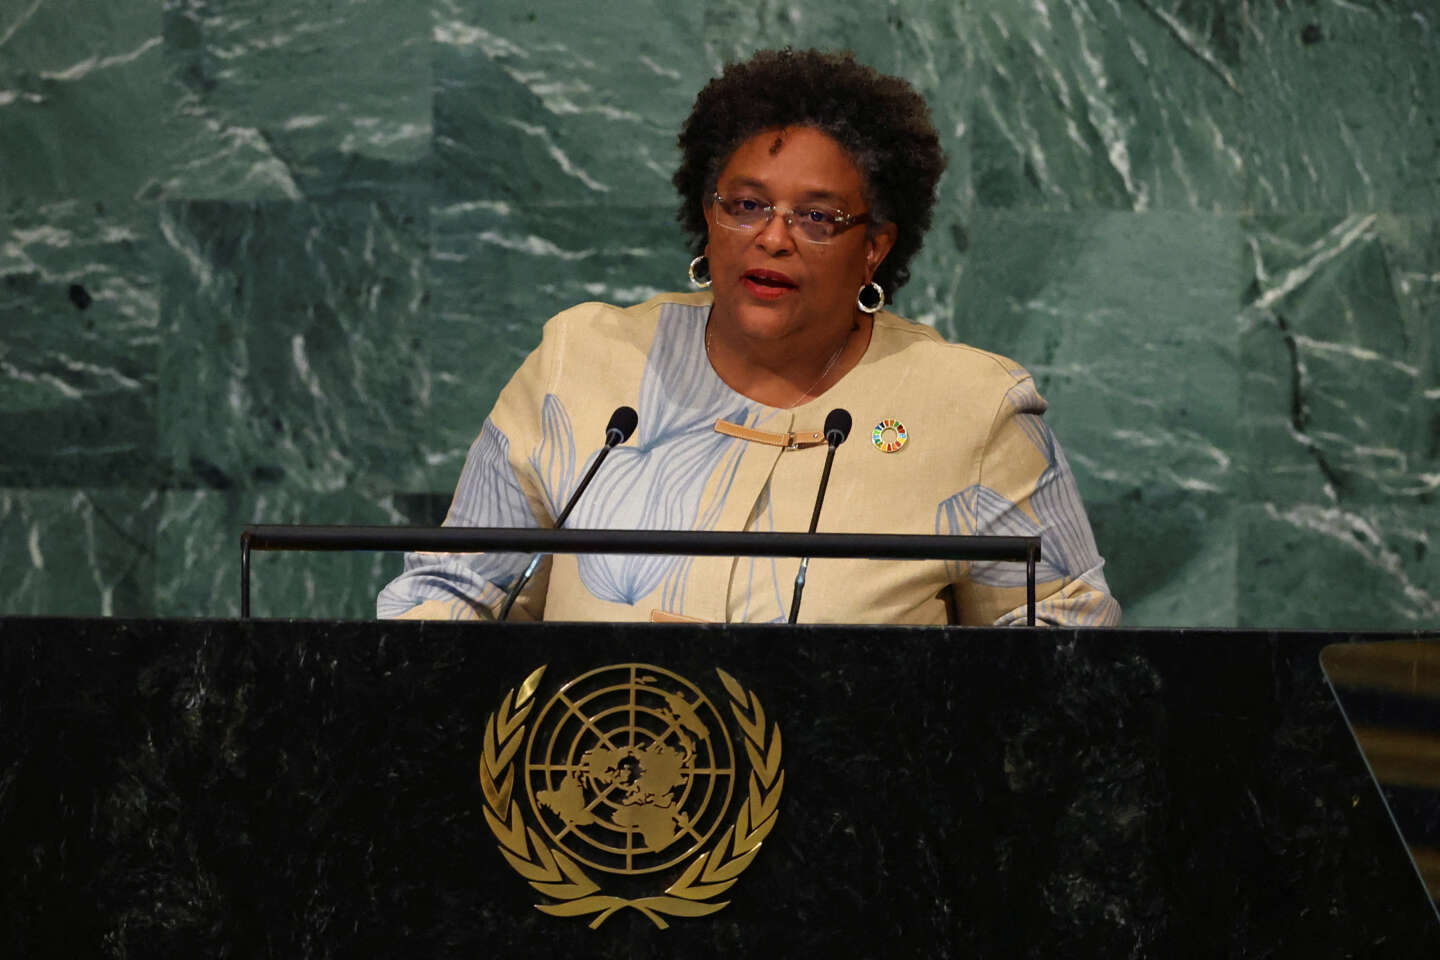 Barbados Prime Minister Mia Mottley Makes Global South S Concerns Heard In The North